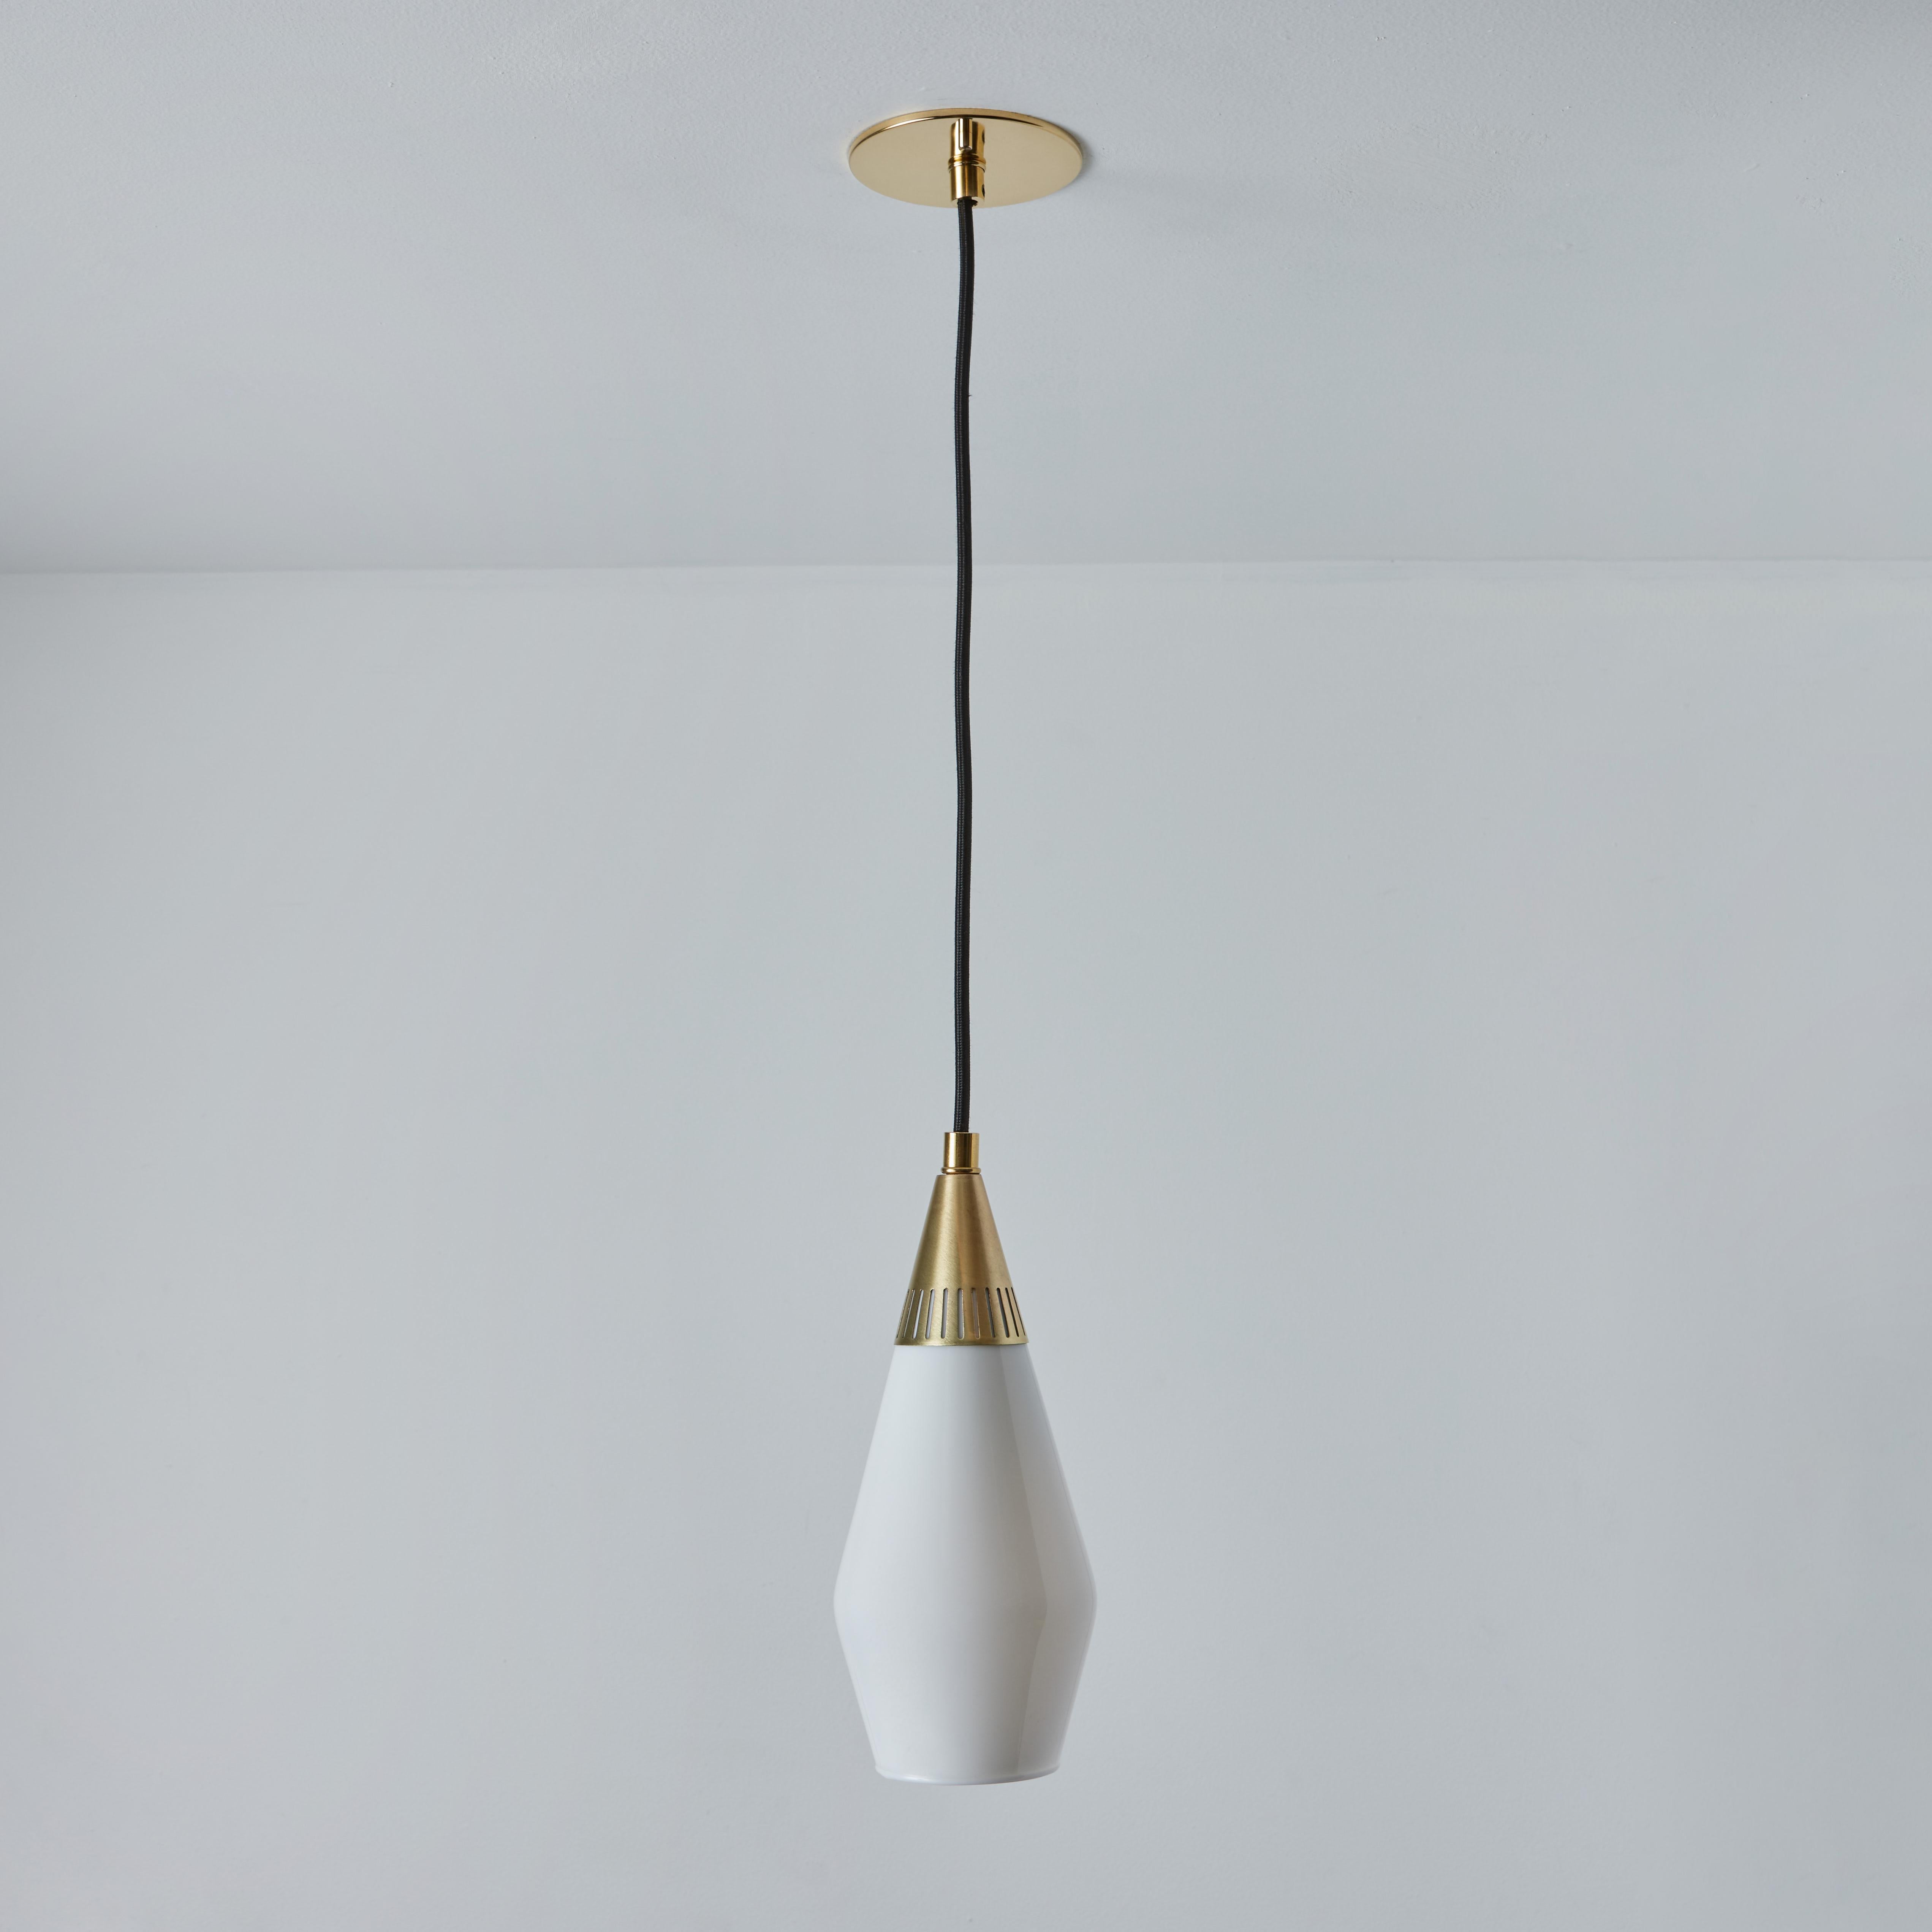 1960s Opaline Glass and Brass Geometric Pendant Lamp Attributed to Mauri Almari For Sale 3